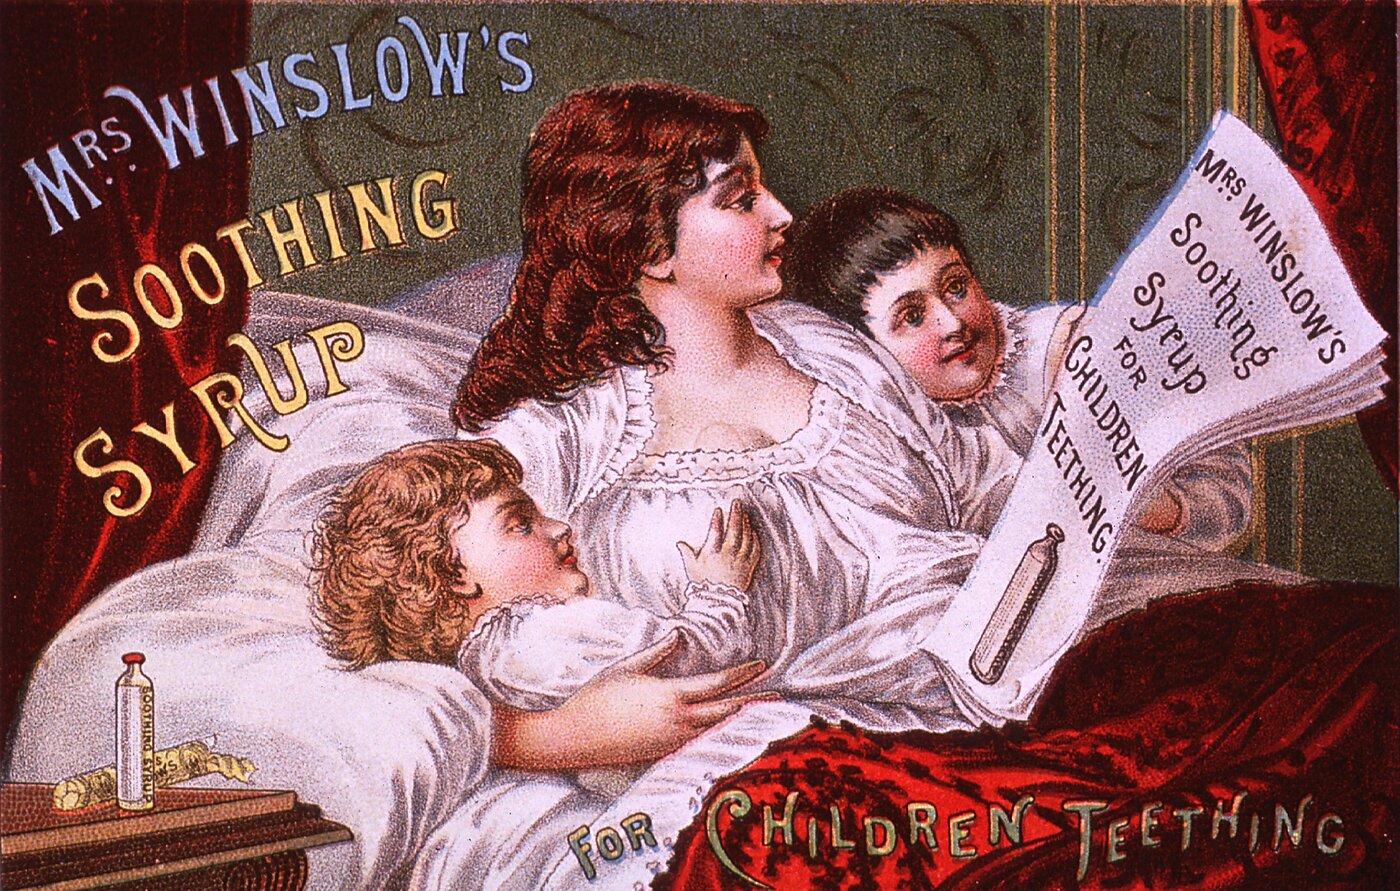 Advertisement for a product for teething children that contained morphine. Card features a mother in bed with her children. She is reading a newspaper advertisement for Mrs. Winslow's Soothing Syrup.